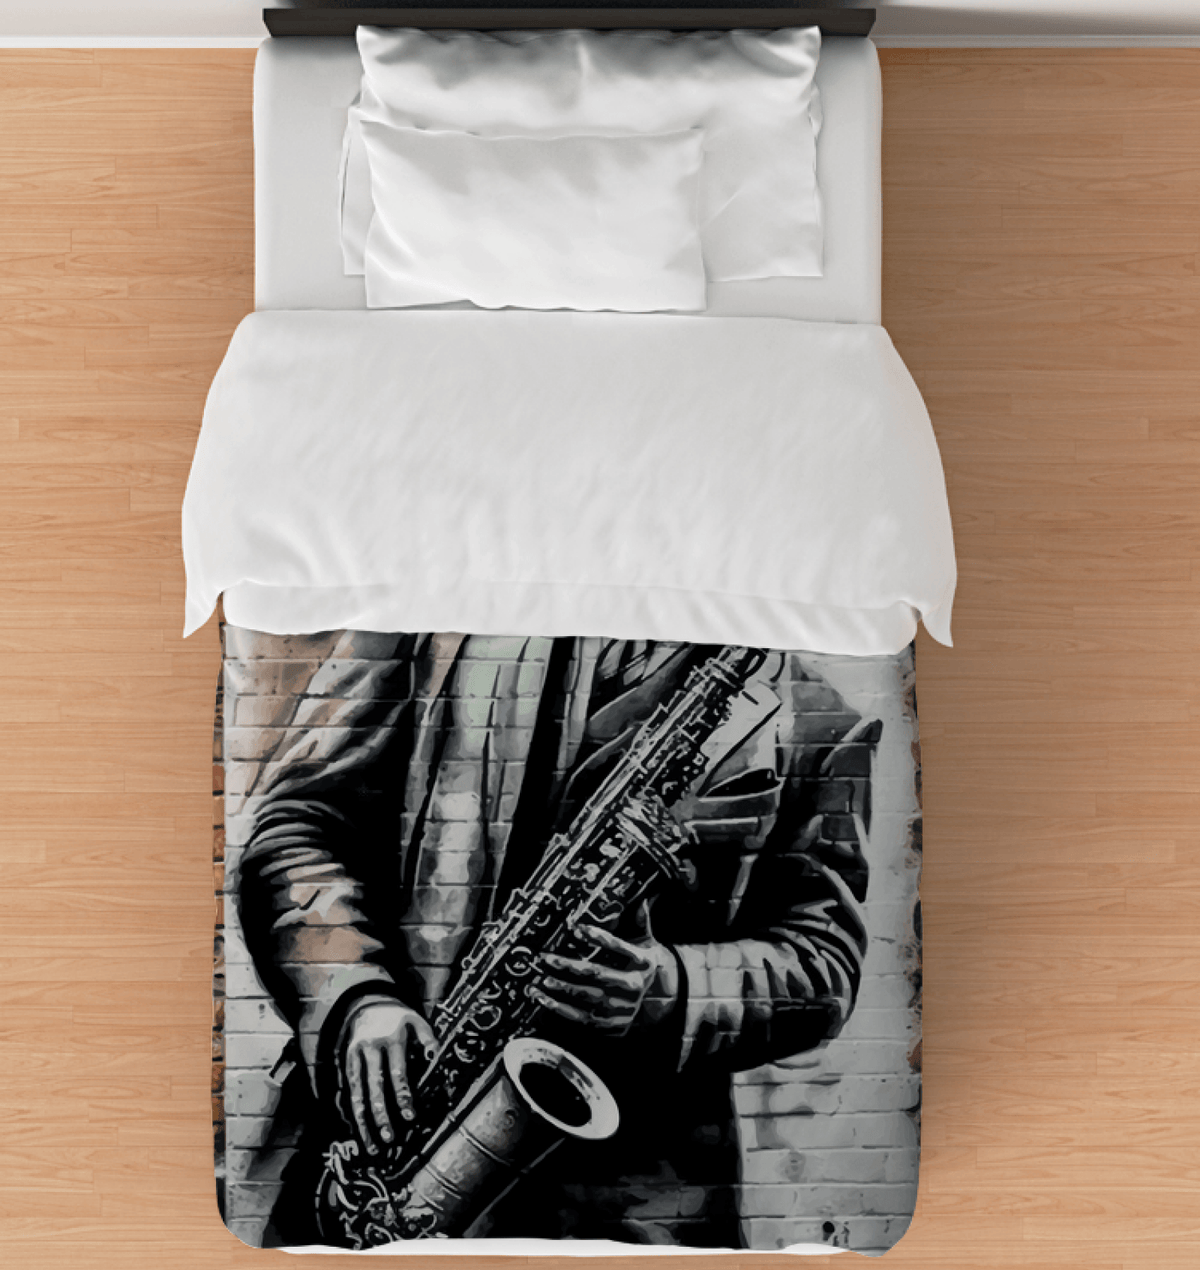 Blow Your Heart Out Duvet Cover - Beyond T-shirts